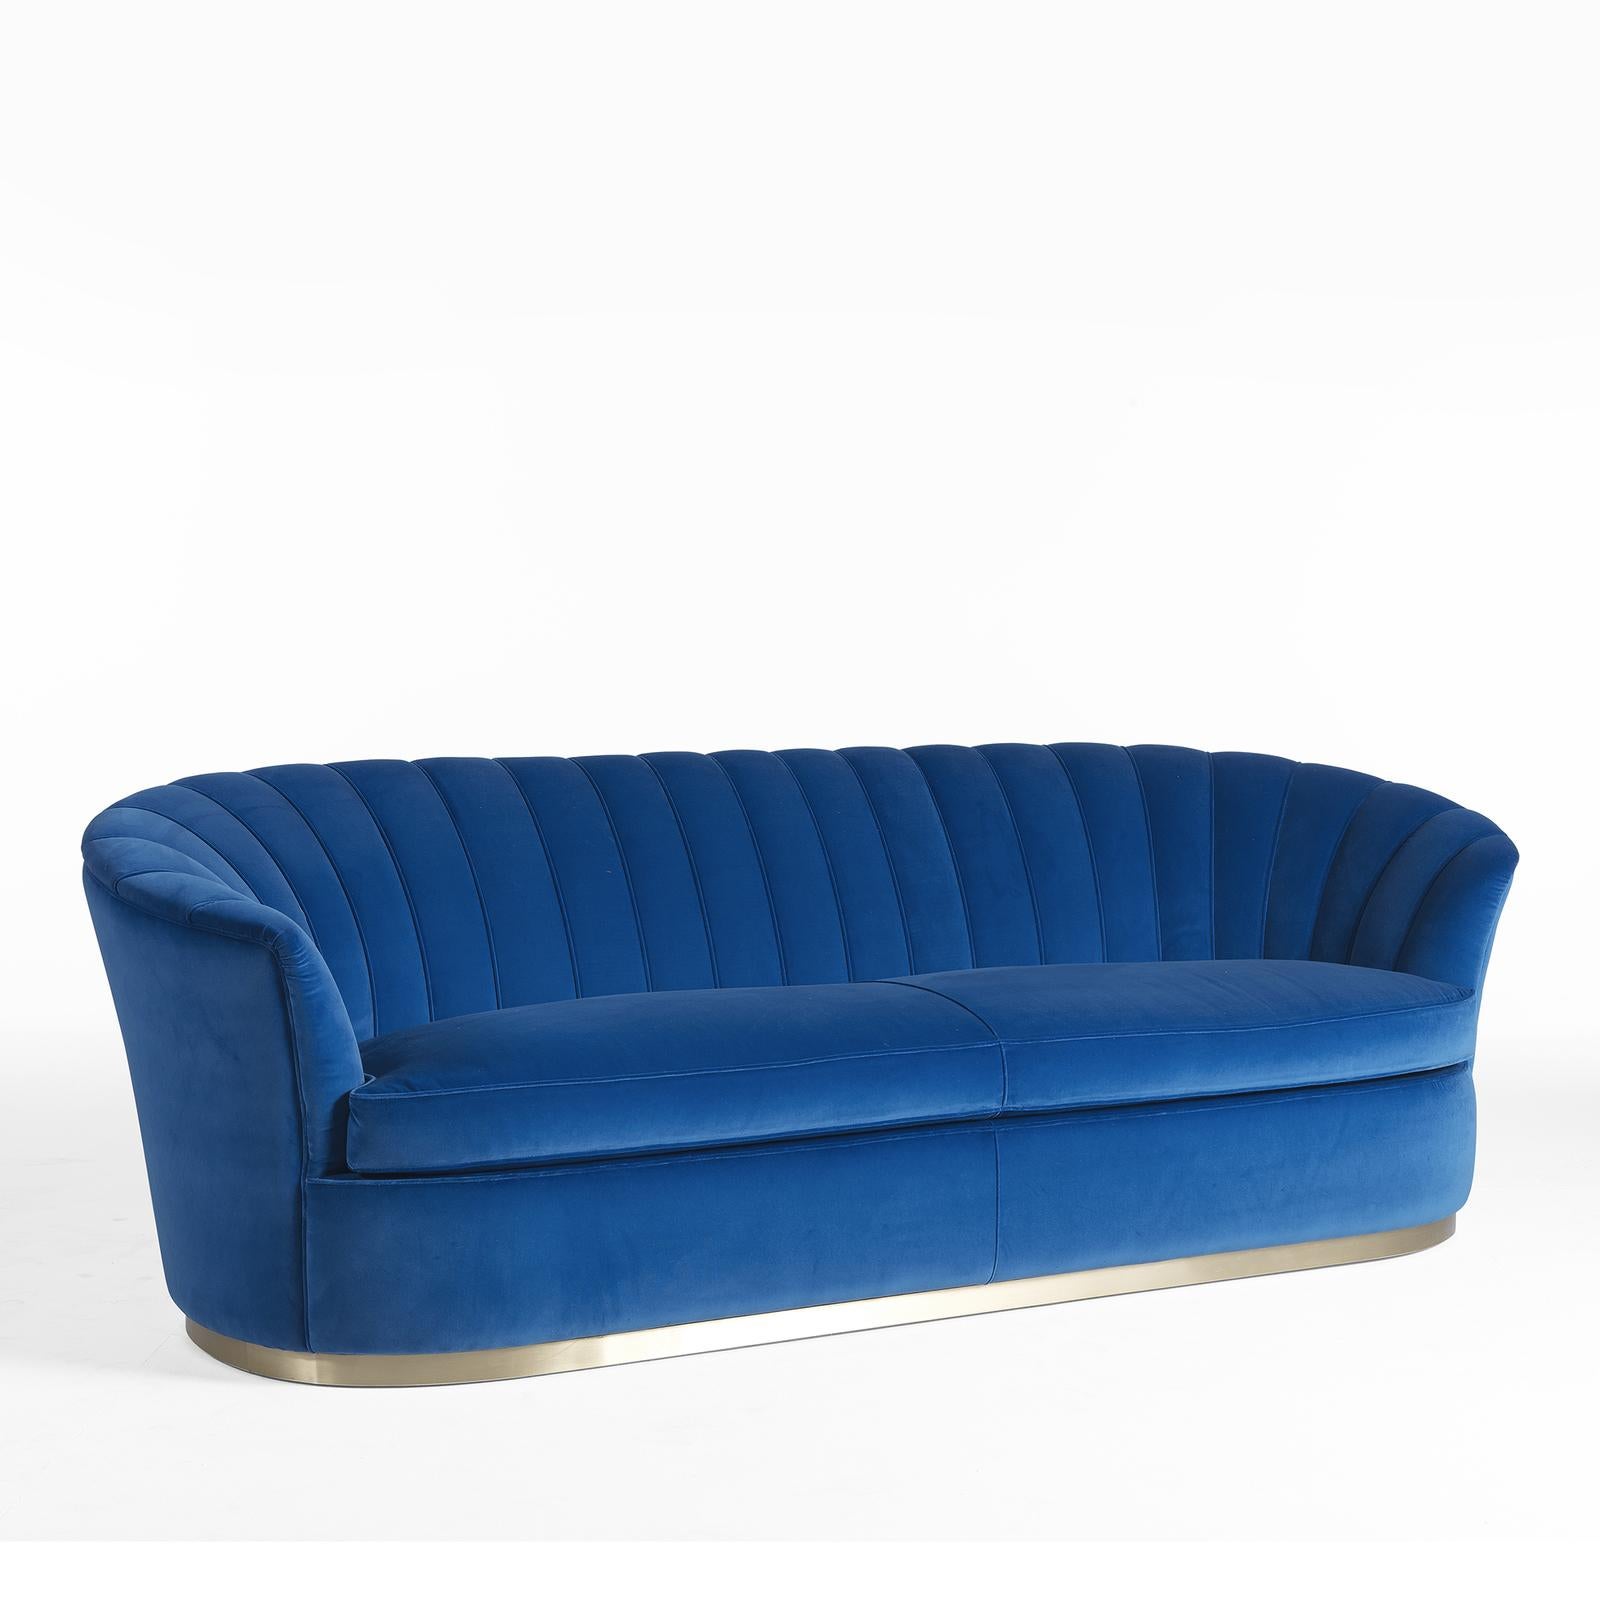 This captivating sofa makes a statement with its bold colors and classic silhouette. A contemporary reinterpretation of an antique cabriole sofa, the solid-wood frame boasts a curved back flowing into the sloped armrests creating a soft, inviting